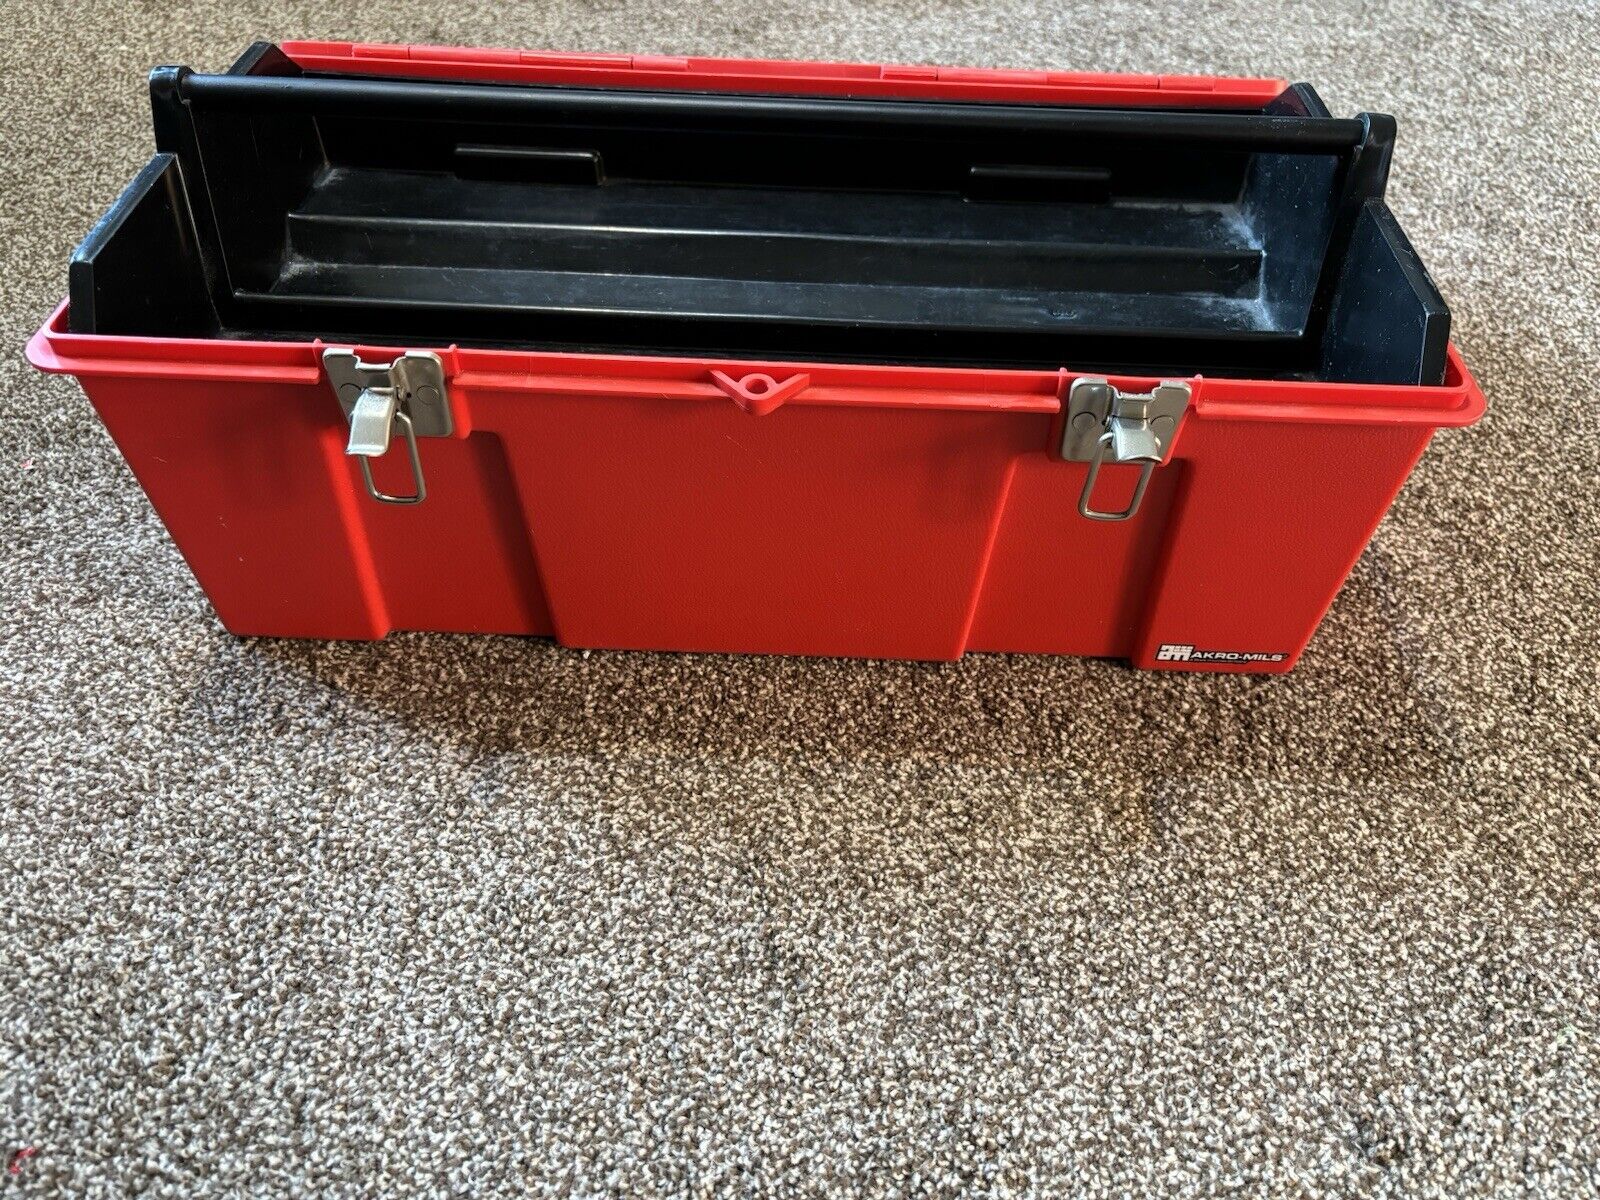 Akro Mils 19 inch Red Tool Box with Tray Double Latch Lockable Vintage